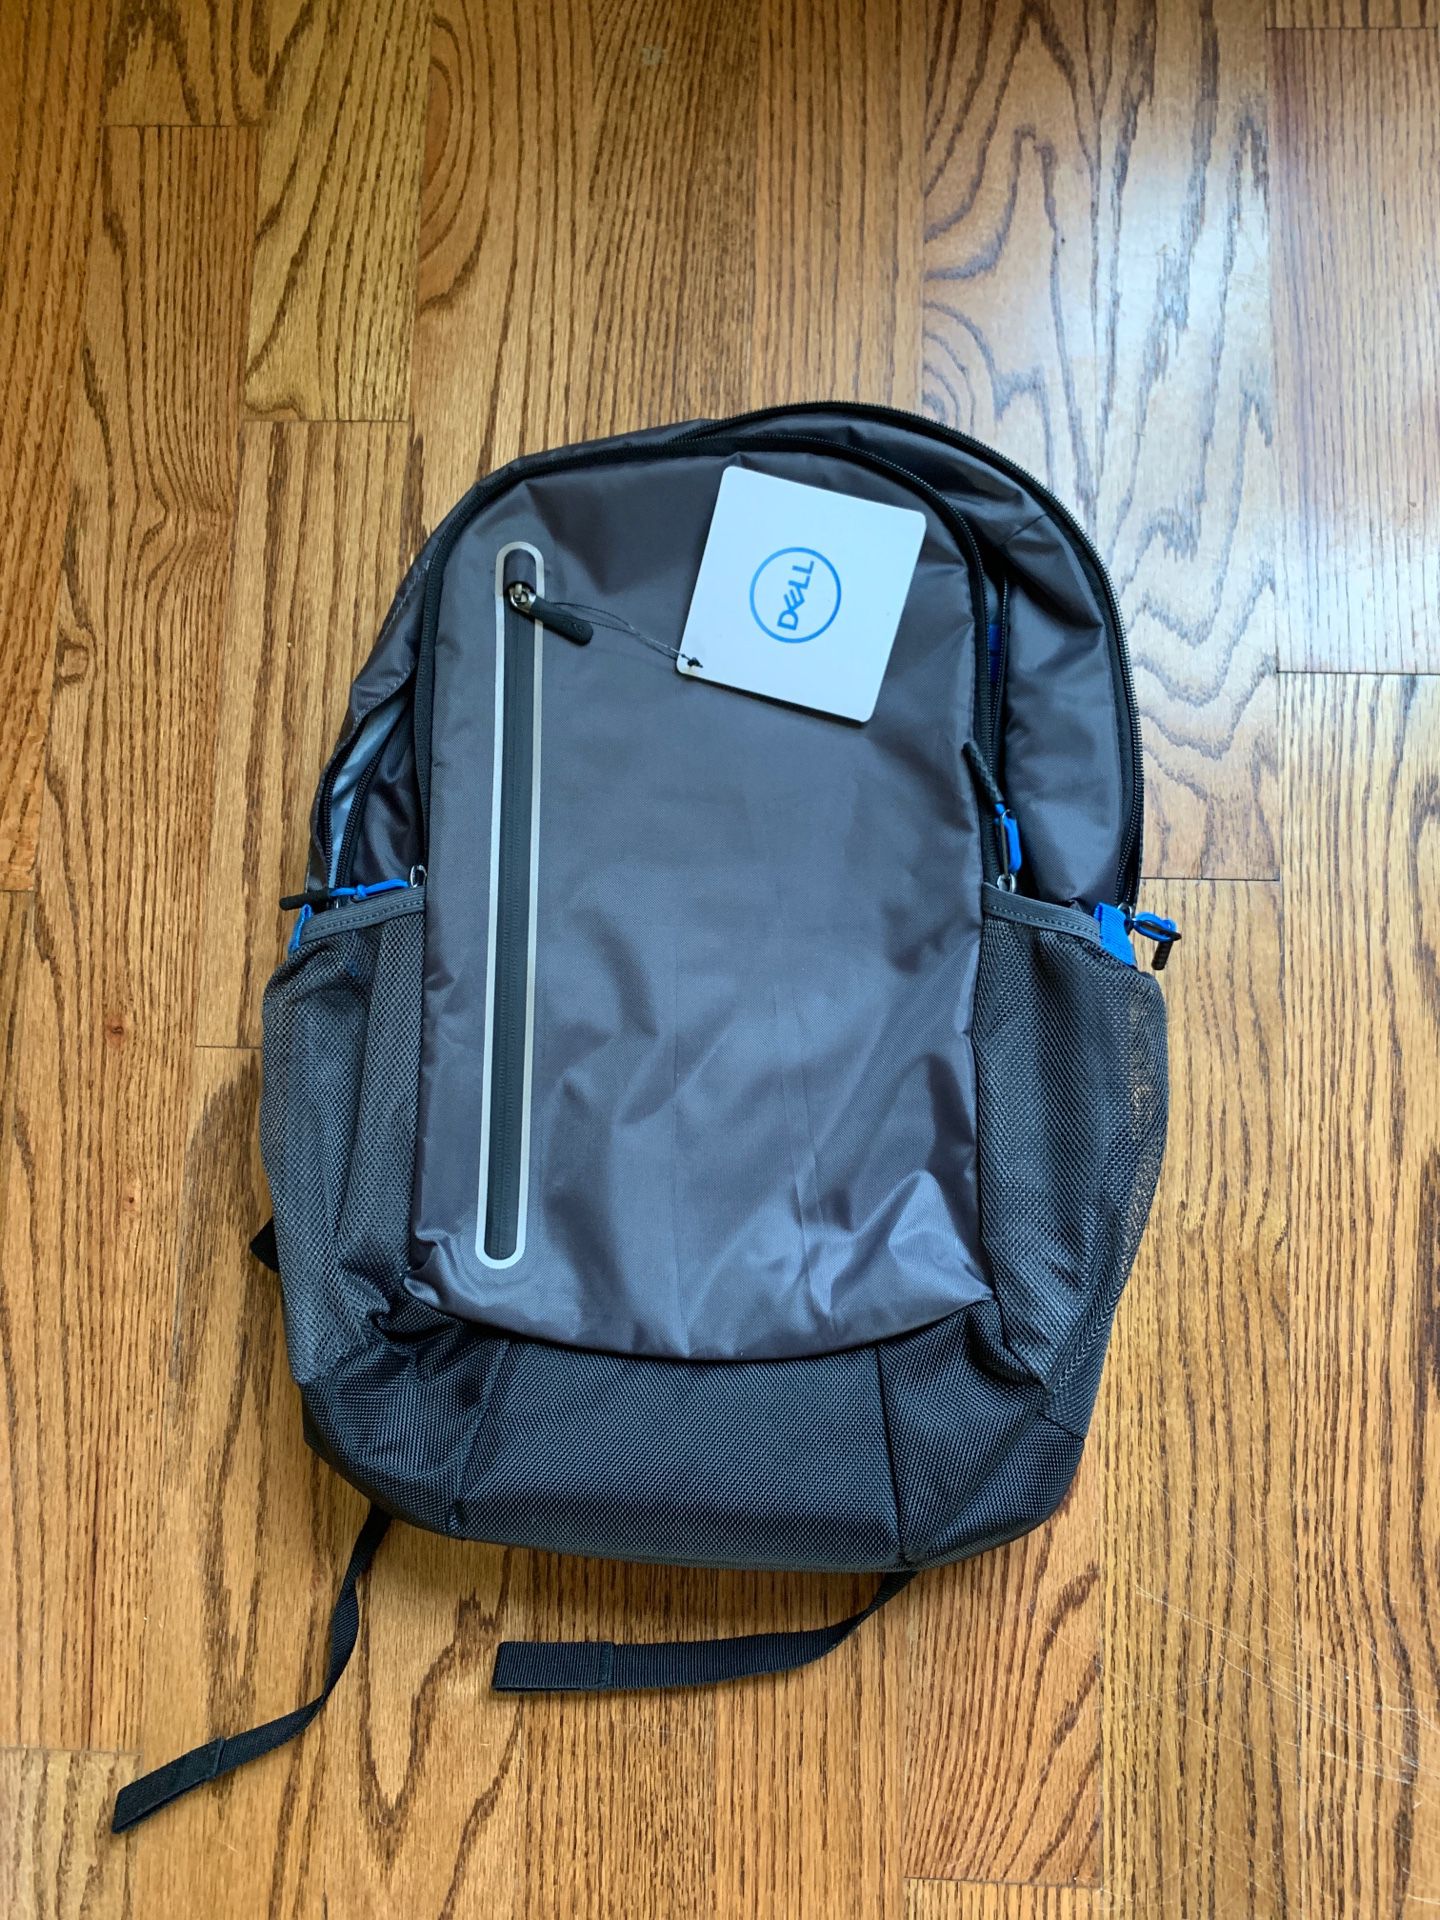 Dell Computer Backpack